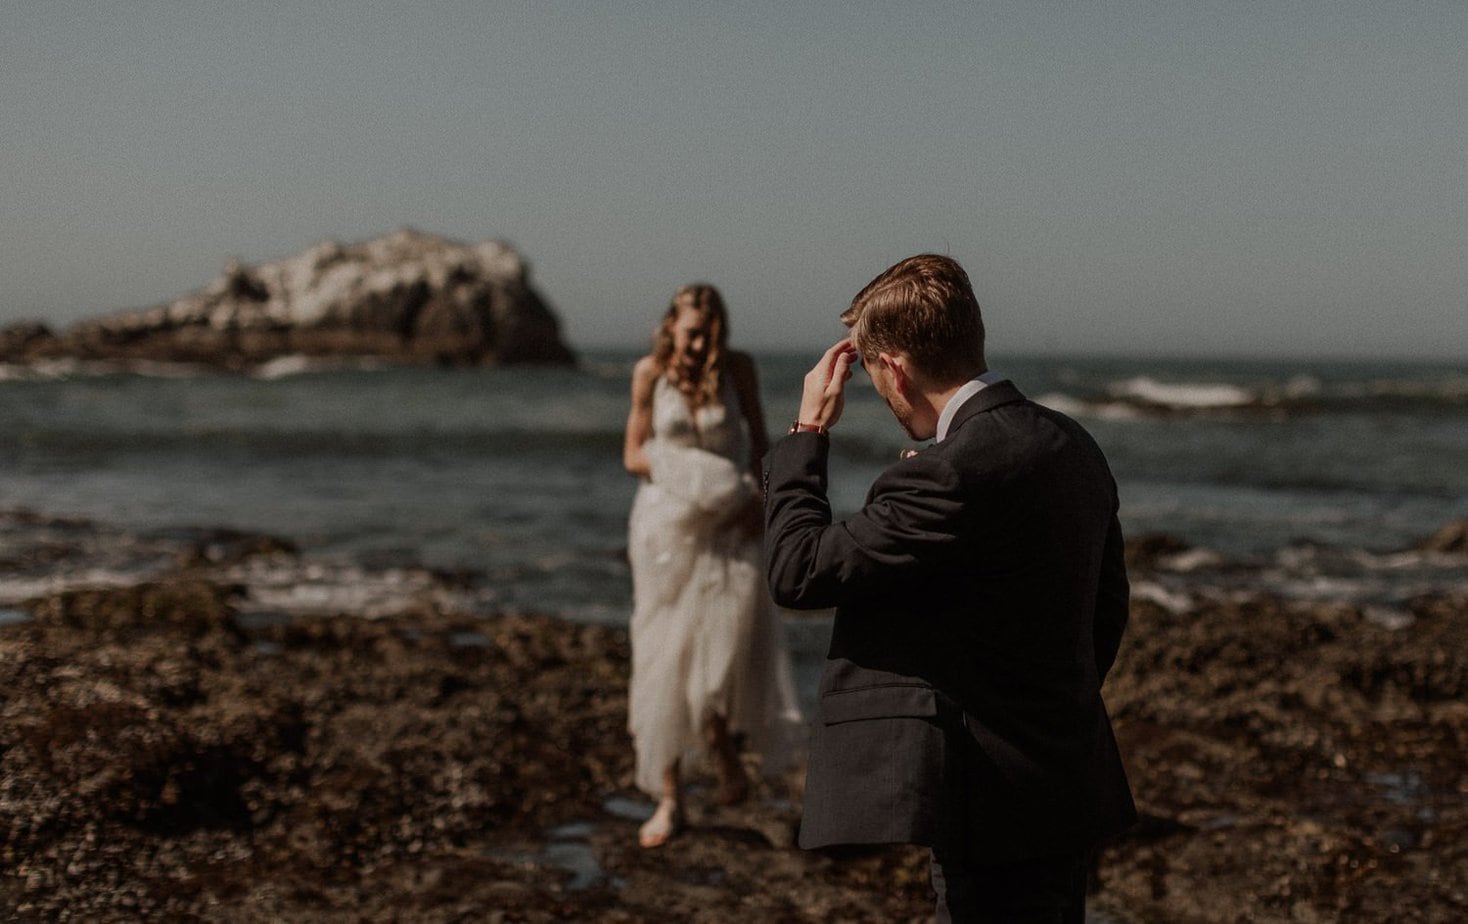 Oregon coast elopement at the Yaquina Head lighthouse on Cobble Beach. Groom gets emotional looking at his bride walk towards him. Eloping on the Oregon coast gives you the best of both worlds with the beach and amazing views.